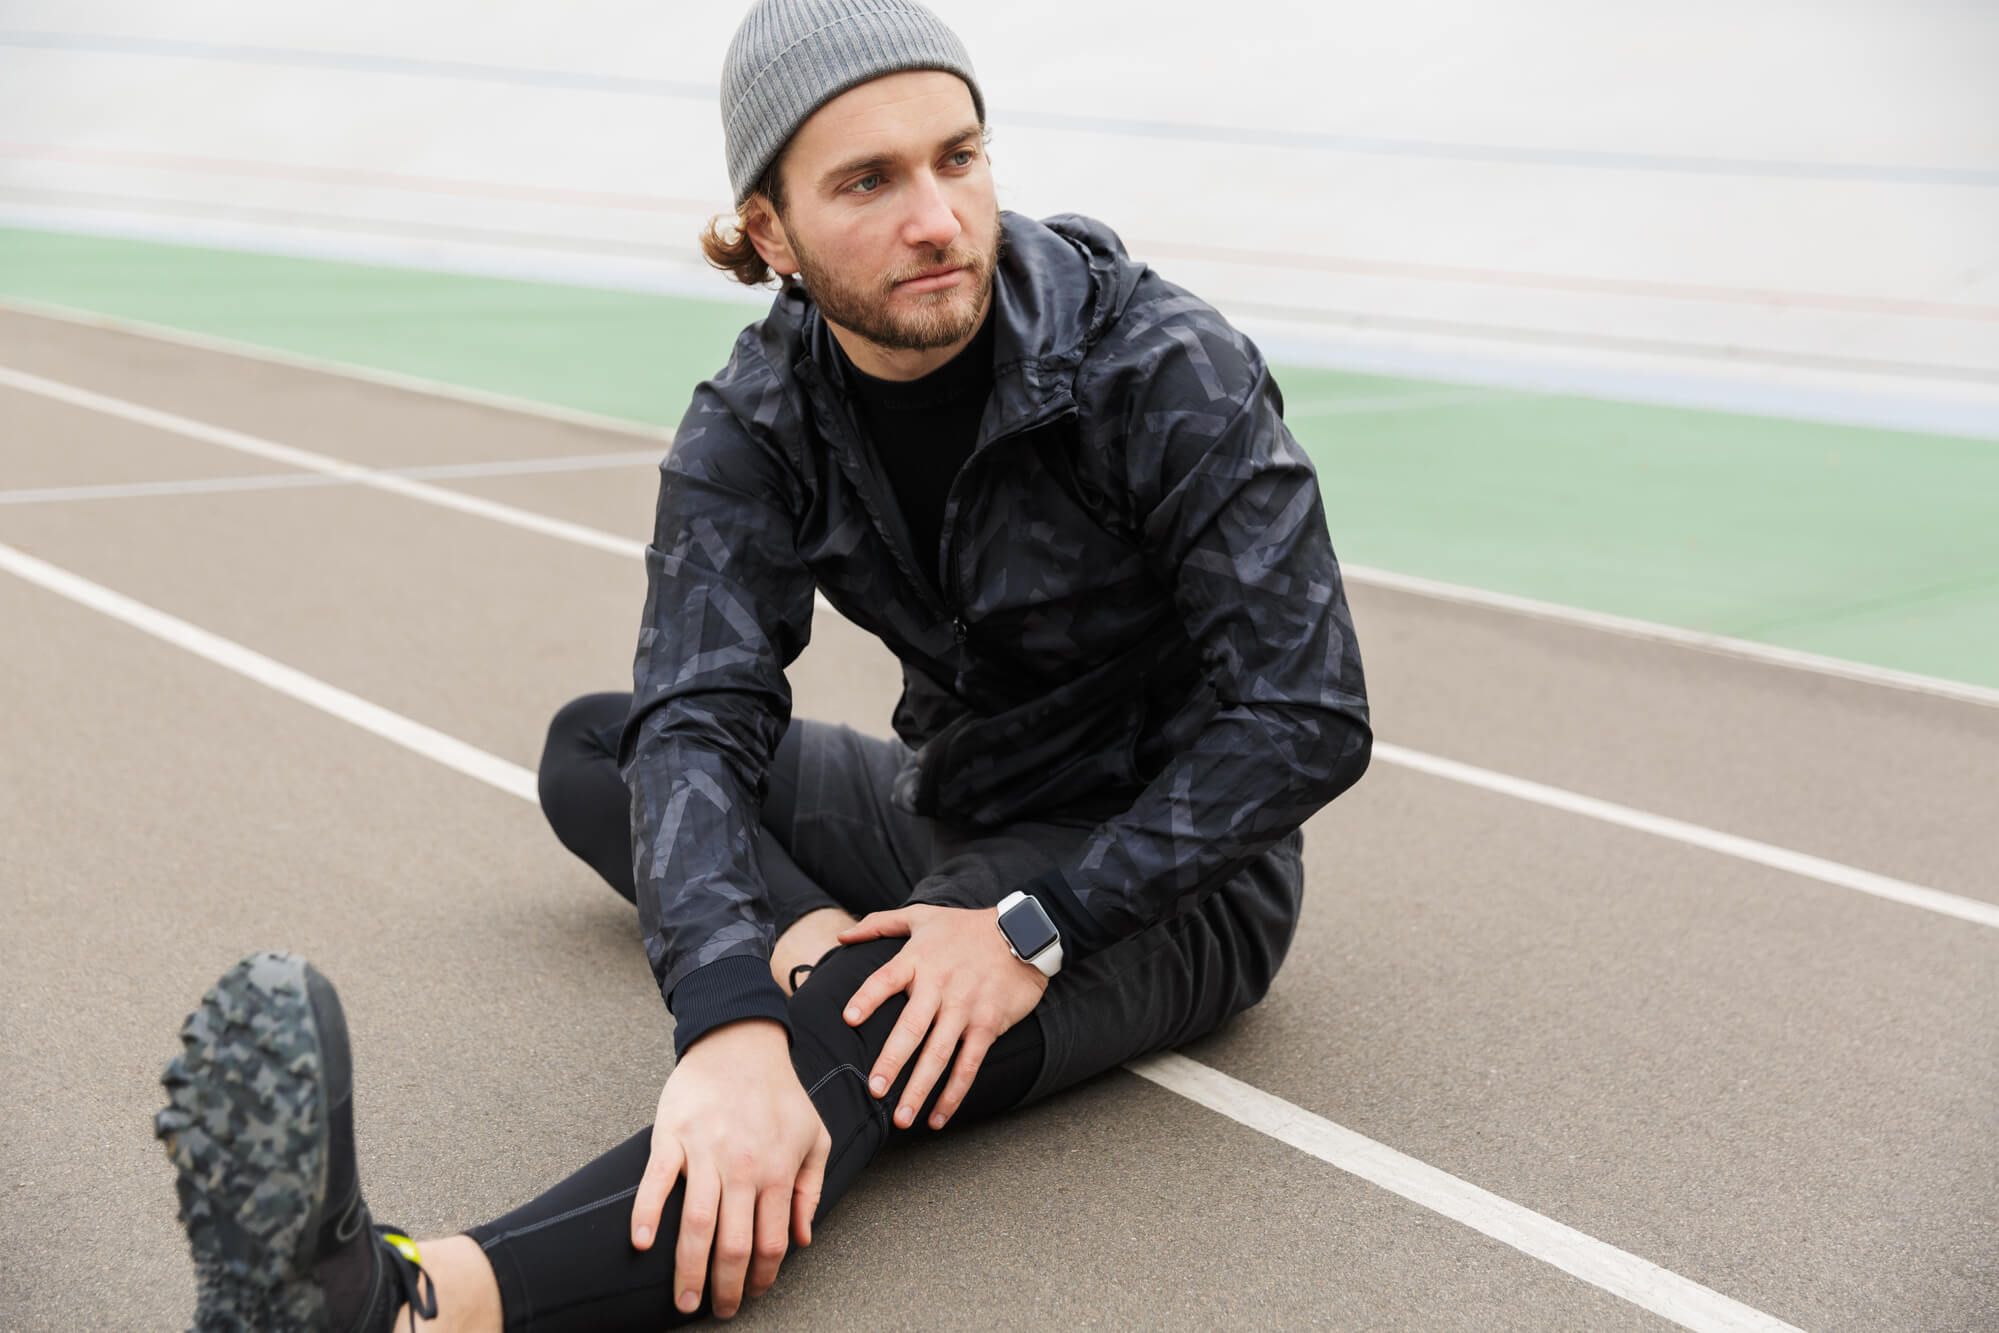 A man in a black training suit stretches while sitting on a running track in cool weather. Do testosterone levels fluctuate naturally or seasonally?